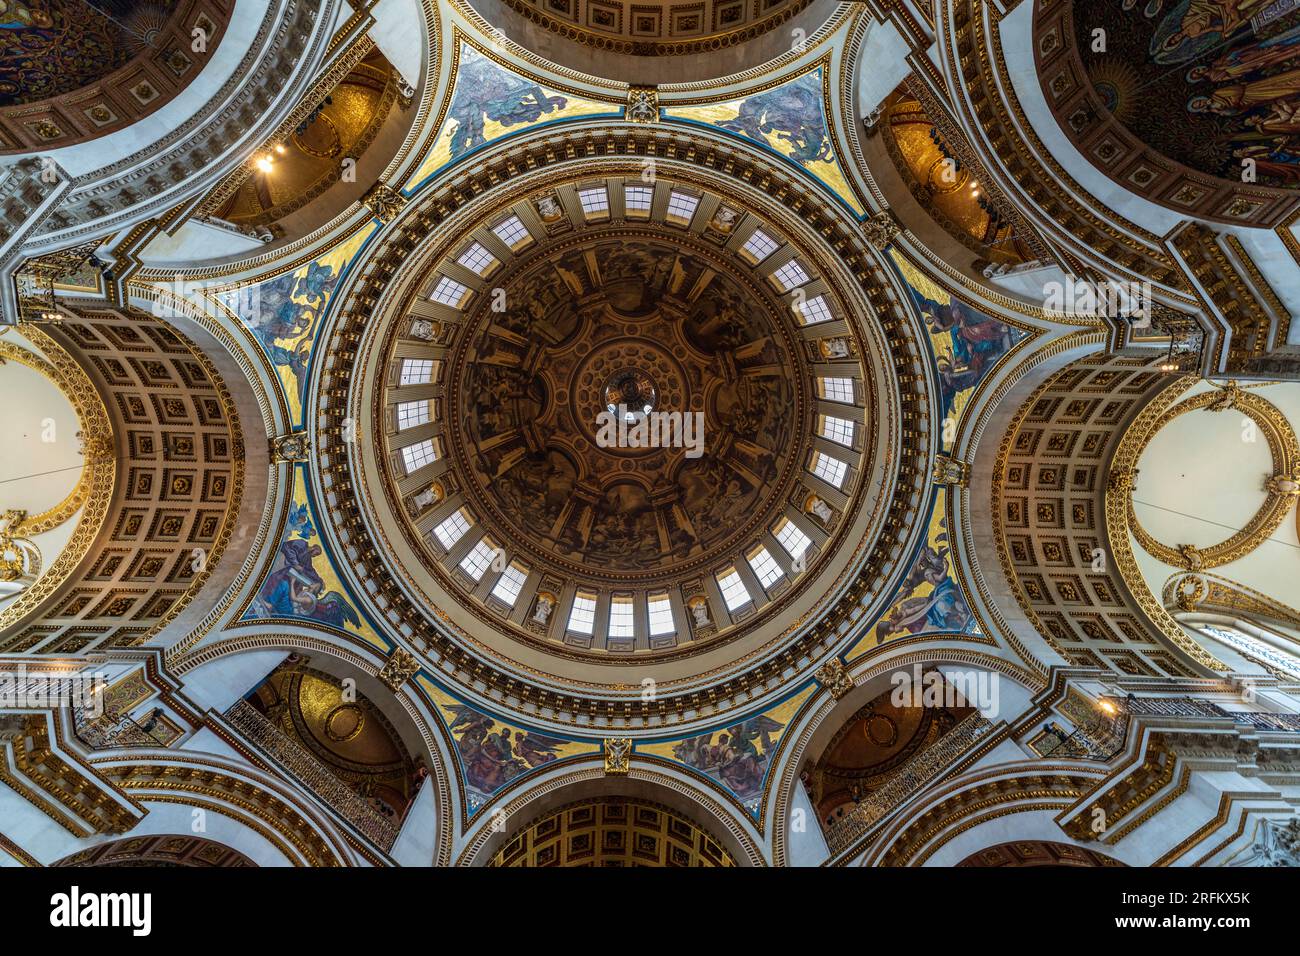 London, England, UK - July 25, 2022. St Paul's Cathedral interior view of the dome, domed ceiling. St Paul's Cathedral dome is an artistic masterpiece Stock Photo